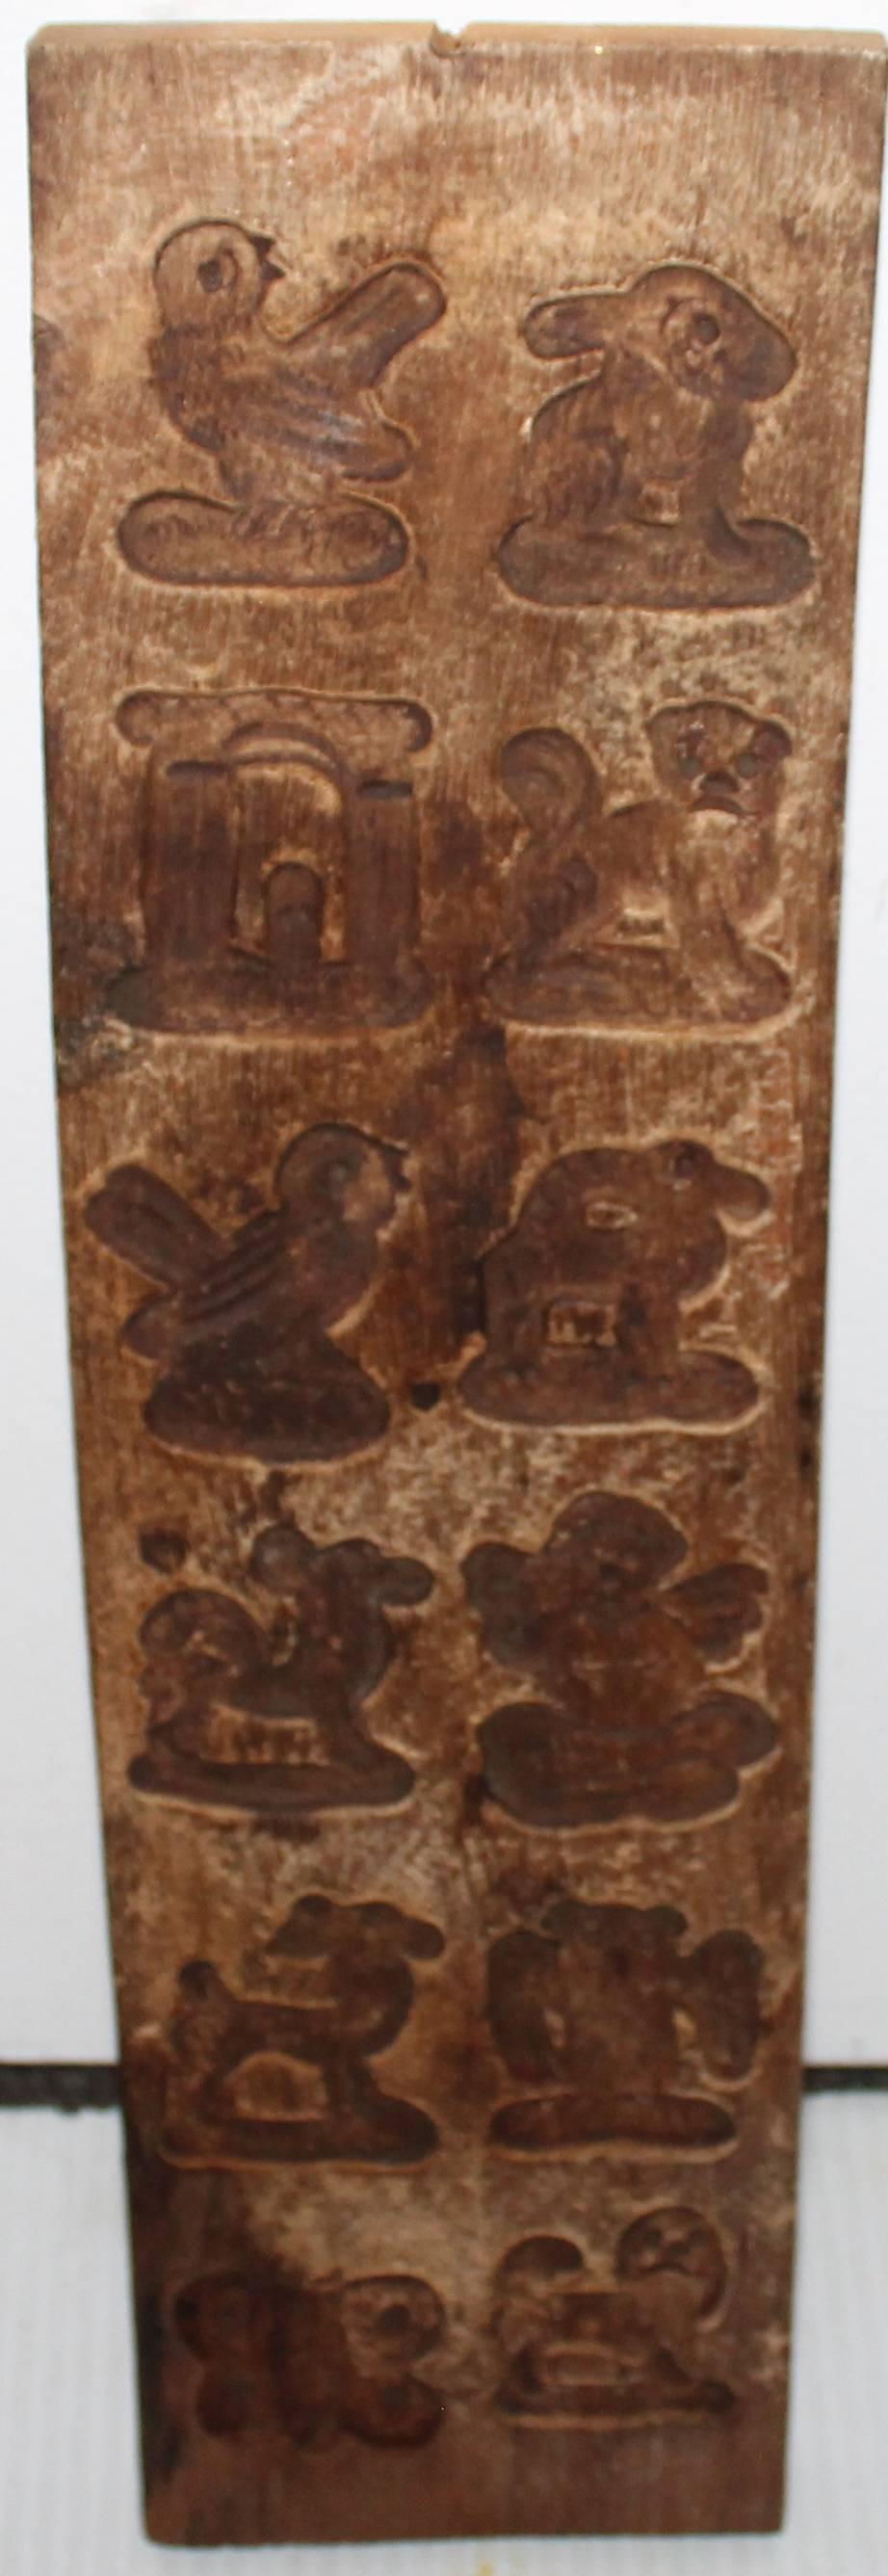 This unusual long hand-carved wood chocolate mold is in good condition. Great hanging on a wall in a kitchen.